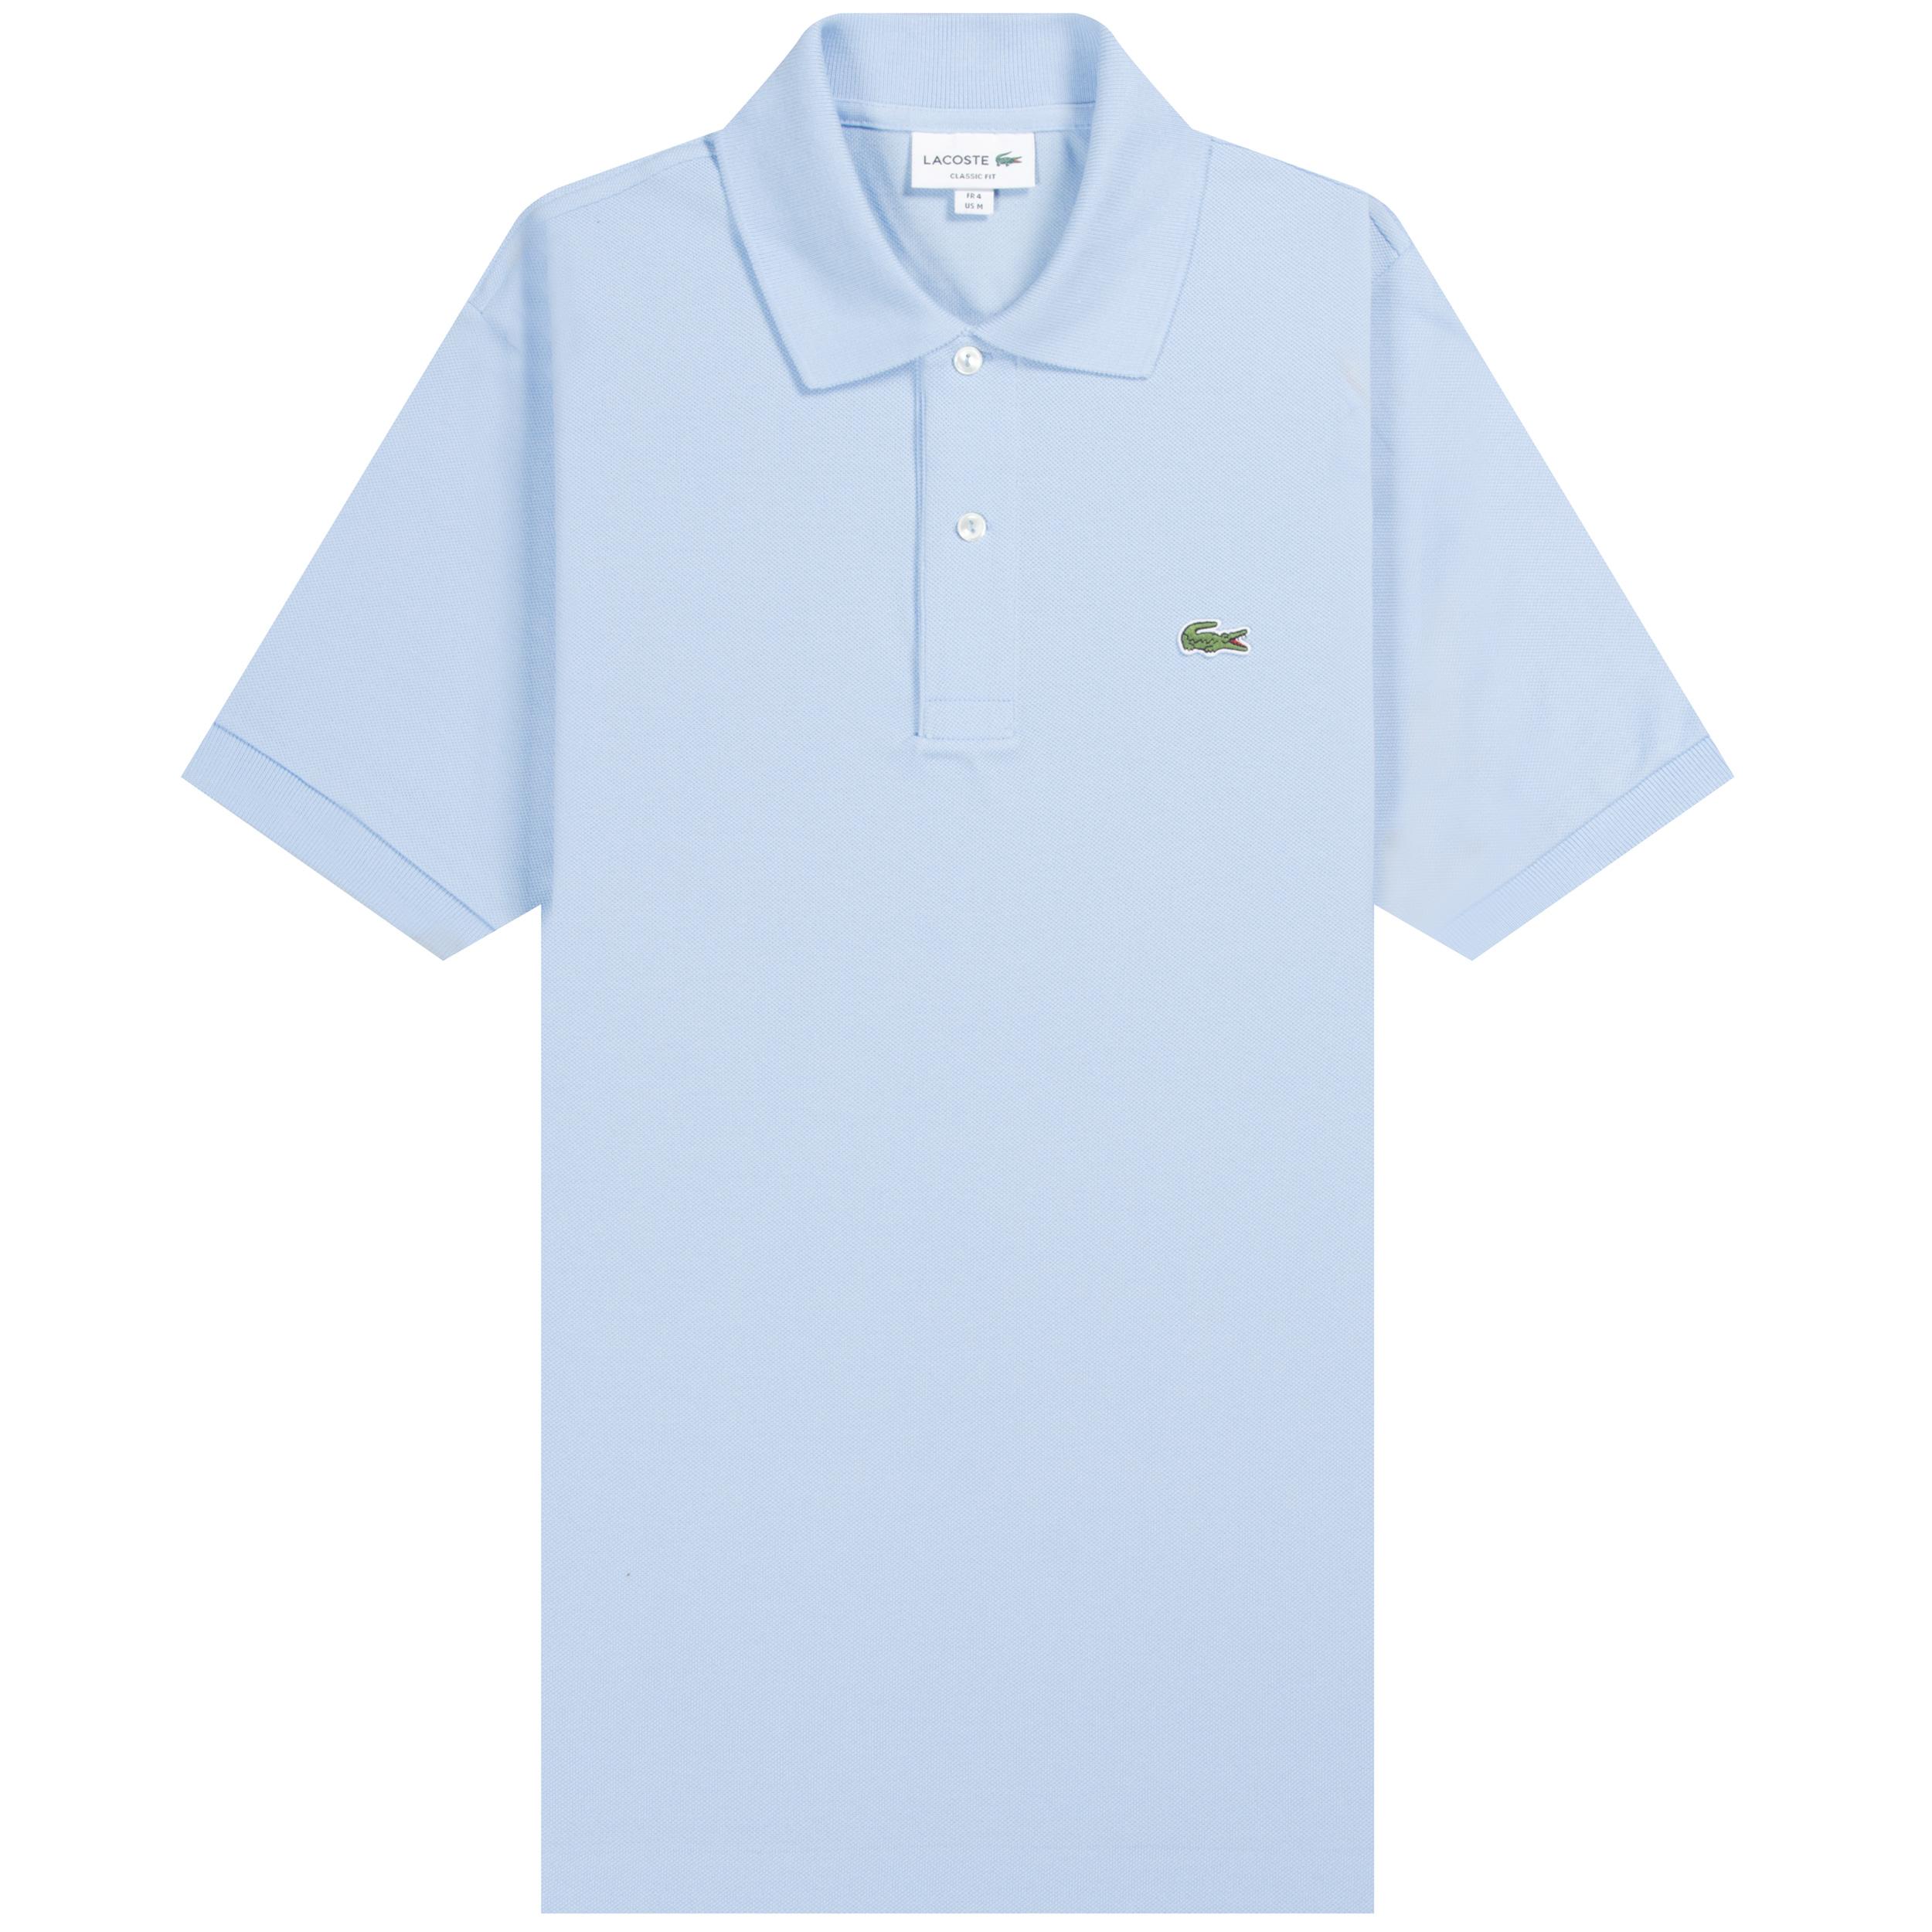 Lacoste 'monogram Patterned' Polo Shirt in Blue for Men - Lyst